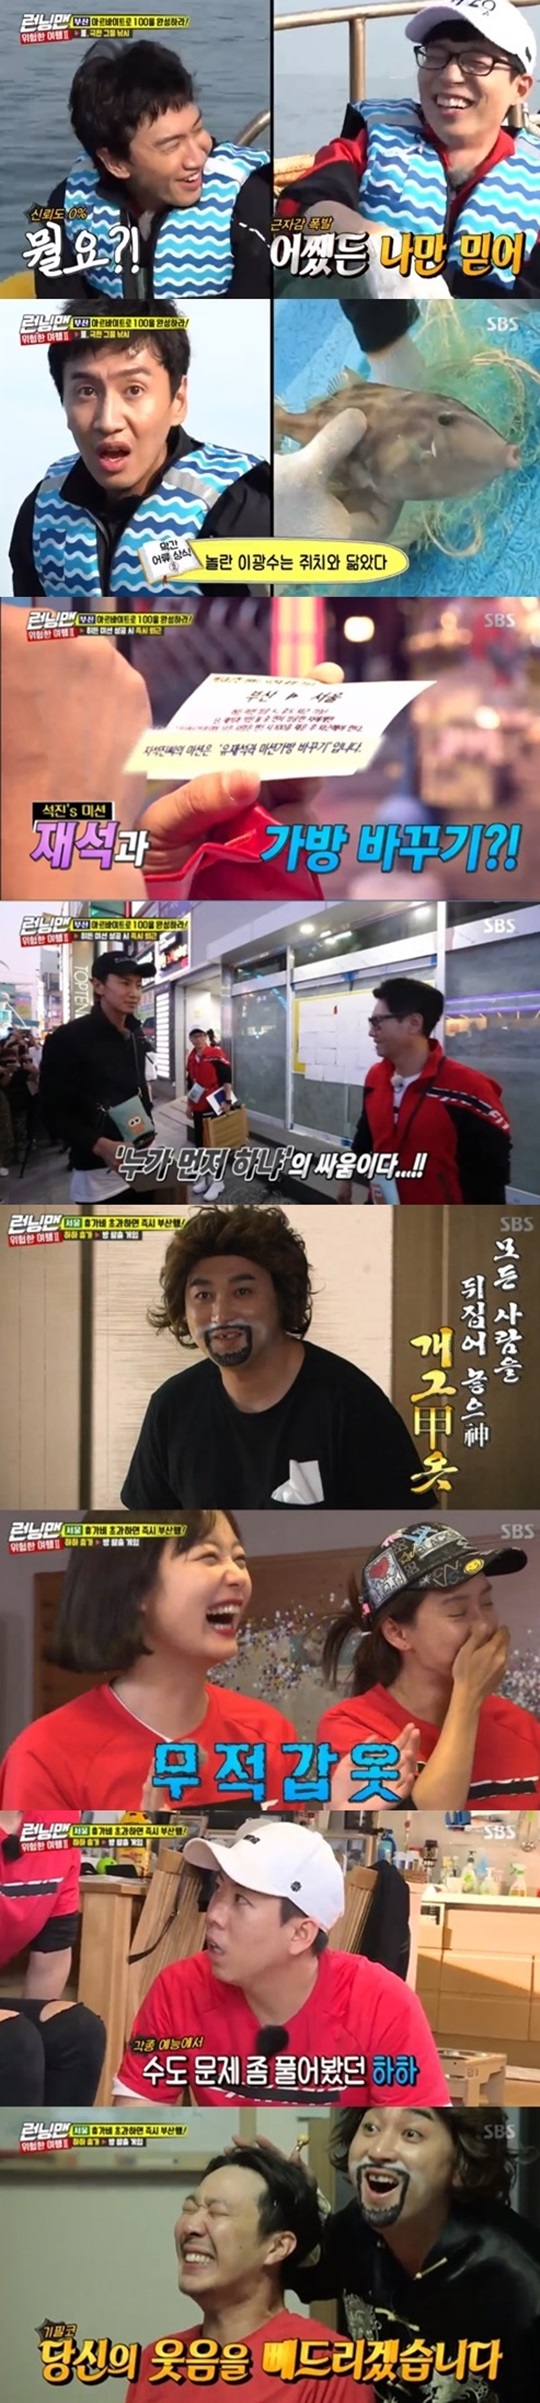 Broadcasters Yoo Jae-Suk, Ji Suk-jin and Actor Lee Kwang-soo have led the Running Man topic.The SBS entertainment program Running Man, which was broadcasted on the evening of the 7th, recorded 2049 ratings of 4.3% based on Nielsen Korea metropolitan area.The average audience rating rose to 4.5% in the first part, 6.6% in the second part, and 8.2% in the Per minute.On this day, Running Man was featured in Dangerous Travel 2 after last week.Among them, Yoo Jae-Suk, Ji Suk-jin and Lee Kwang-soo were Top Model on the mission to match the number 100 from Busan to Alba.The three went to the net fishing Alba, but they could not catch the desired fish, and Yoo Jae-Suk laughed at the fish.Eventually the three failed to fill the 100 and Top Model on another Alba caricature.Meanwhile, Yoo Jae-Suk also top-modeled the Hidden Mission: Ji Suk-jin Sock Remove and Ji Suk-jin Yoo Jae-Suk Mission Bag Change.In addition, Yoo Jae-Suk, who built a coalition front with Lee Kwang-soo, beat Ji Suk-jin and won a ticket to Seoul.Lee Kwang-soo also liquidated his forehead debt, but Ji Suk-jin remained alone in Busan, filling the number 100 through a hodok sale.The scene soared to a Per minute high of 8.2%, taking the best minute.Other members then headed to Yang Se-chans home for Hahas room escape game.They walked each mission at Yang Se-chans house and one by one Top Model; the wicket was the surprise appearance of comedian Hwang Je-seong.He laughed with a gag armor that overwhelmed everyone, and Haha eventually failed the laugh-holding mission.In addition, Haha and Yang Se-chan released an unexpected fool chemistry with a quiz showdown, and Kim Jong Kook enjoyed a vacation of Running Man with toilet surfing.